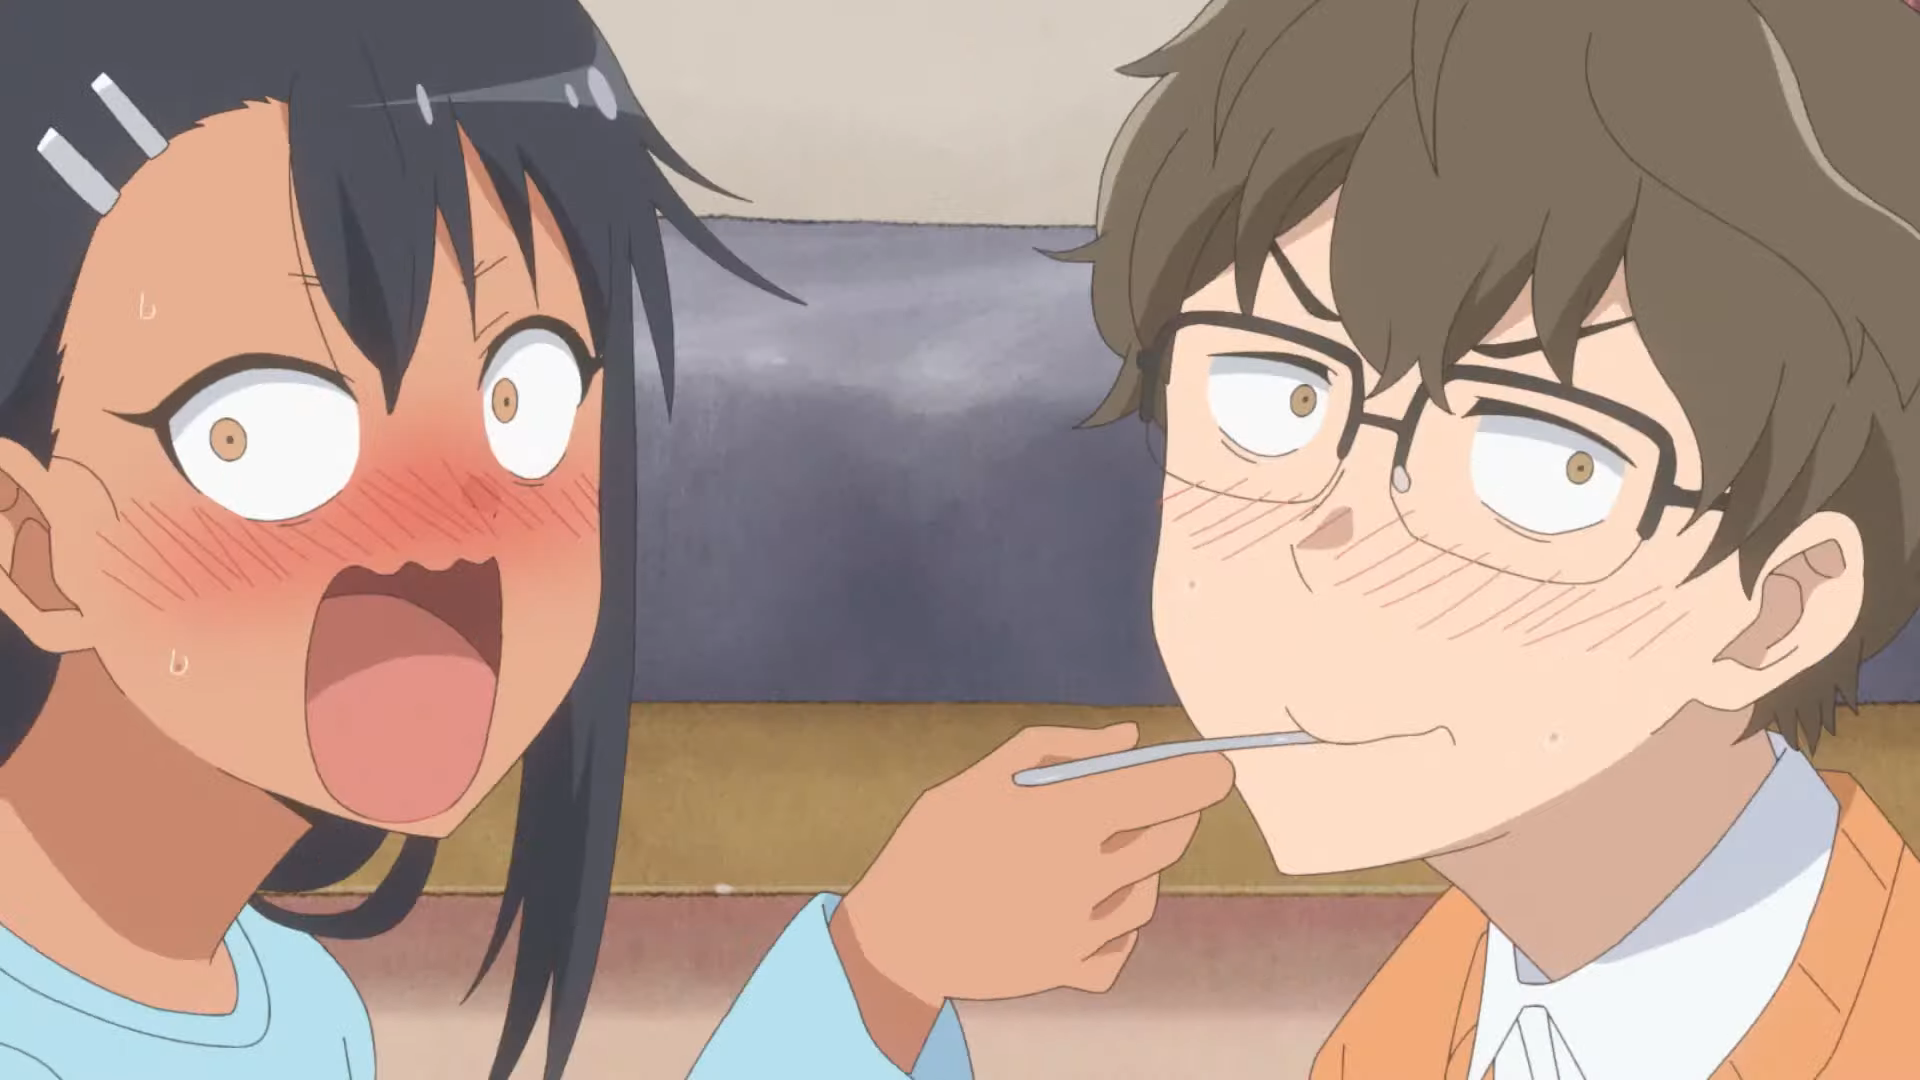 Teaser trailer de Don't Toy With Me, Miss Nagatoro 2